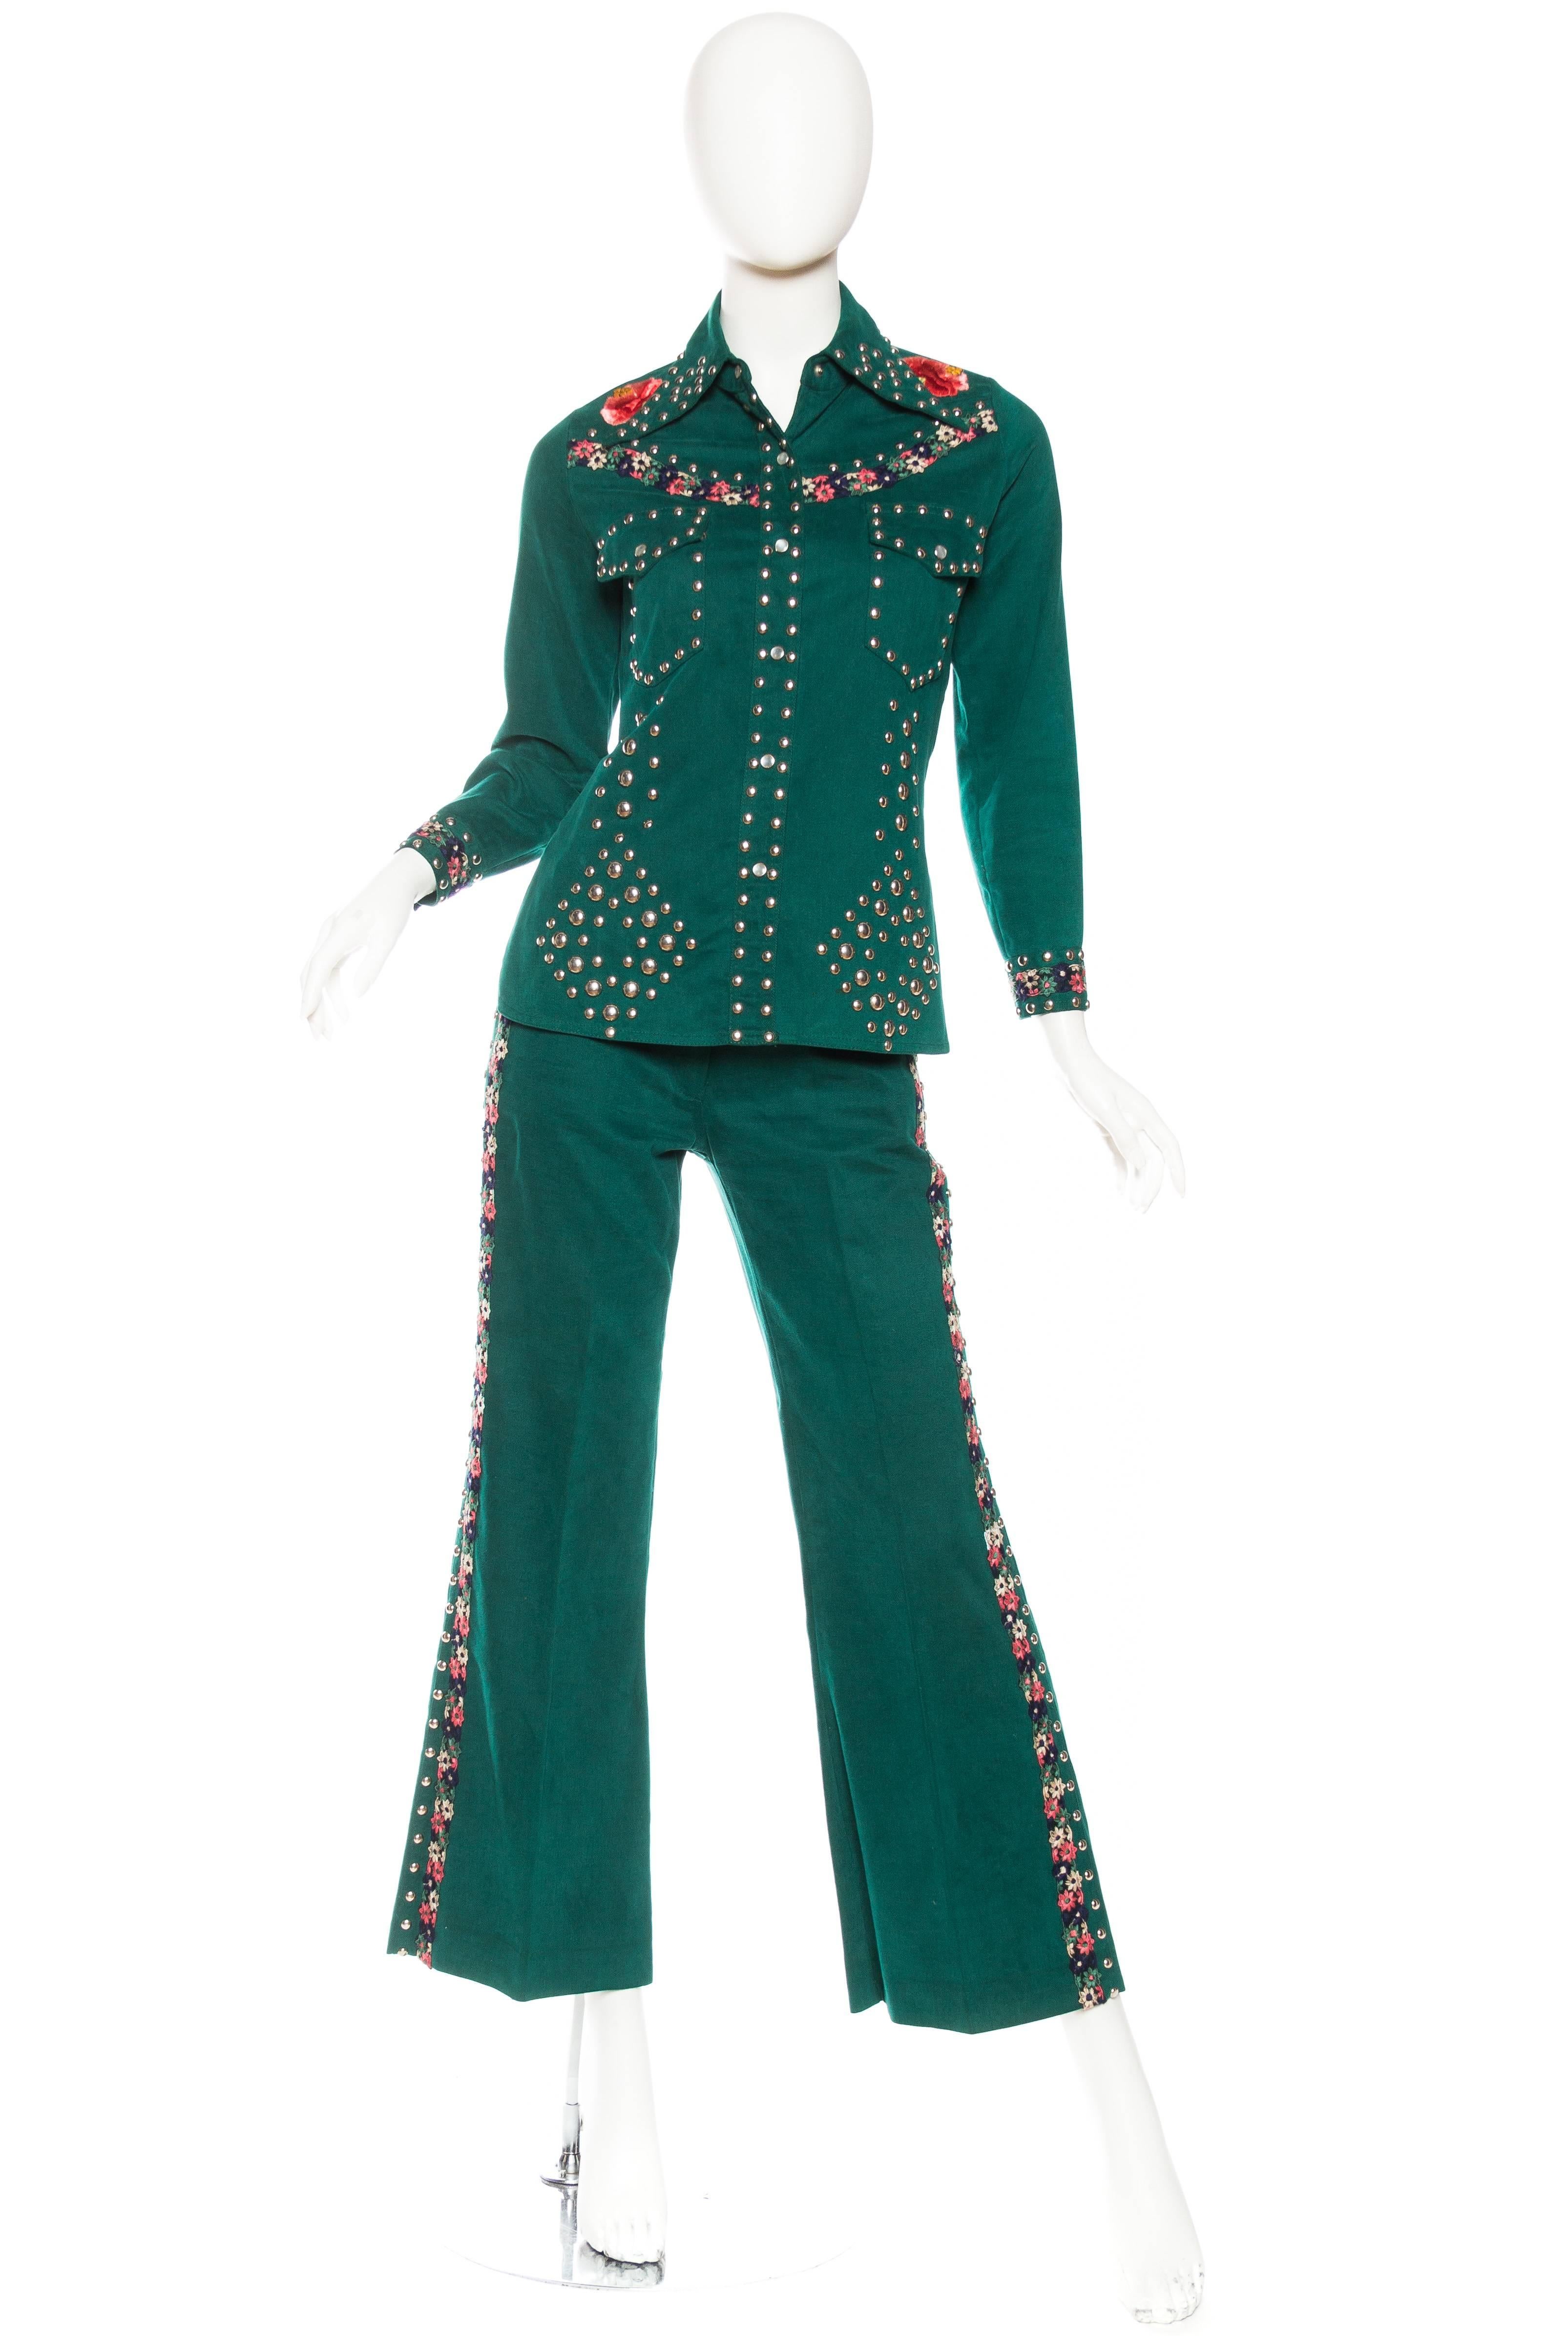 Blue Gucci Style 1970s Studded Denim Suit with Floral Embroidery